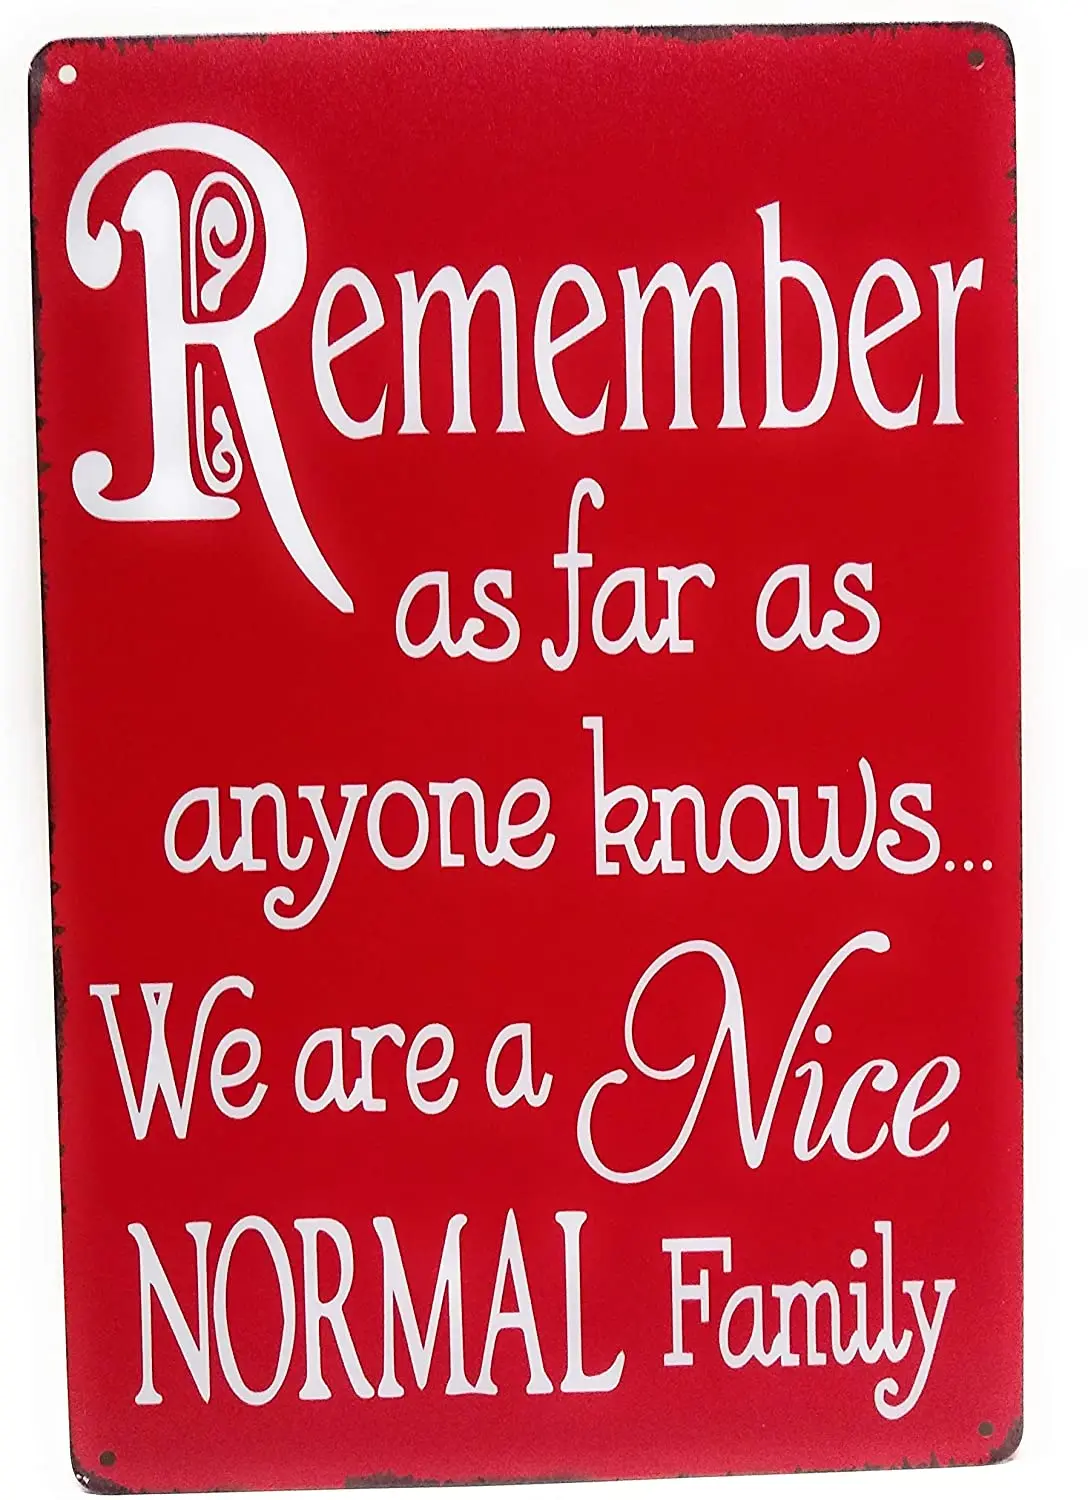 

Remember As Far As Anyone Knows We are A Nice Normal Family Poster Funny Art Decor Vintage Aluminum Retro Metal Tin Sign 20x30cm